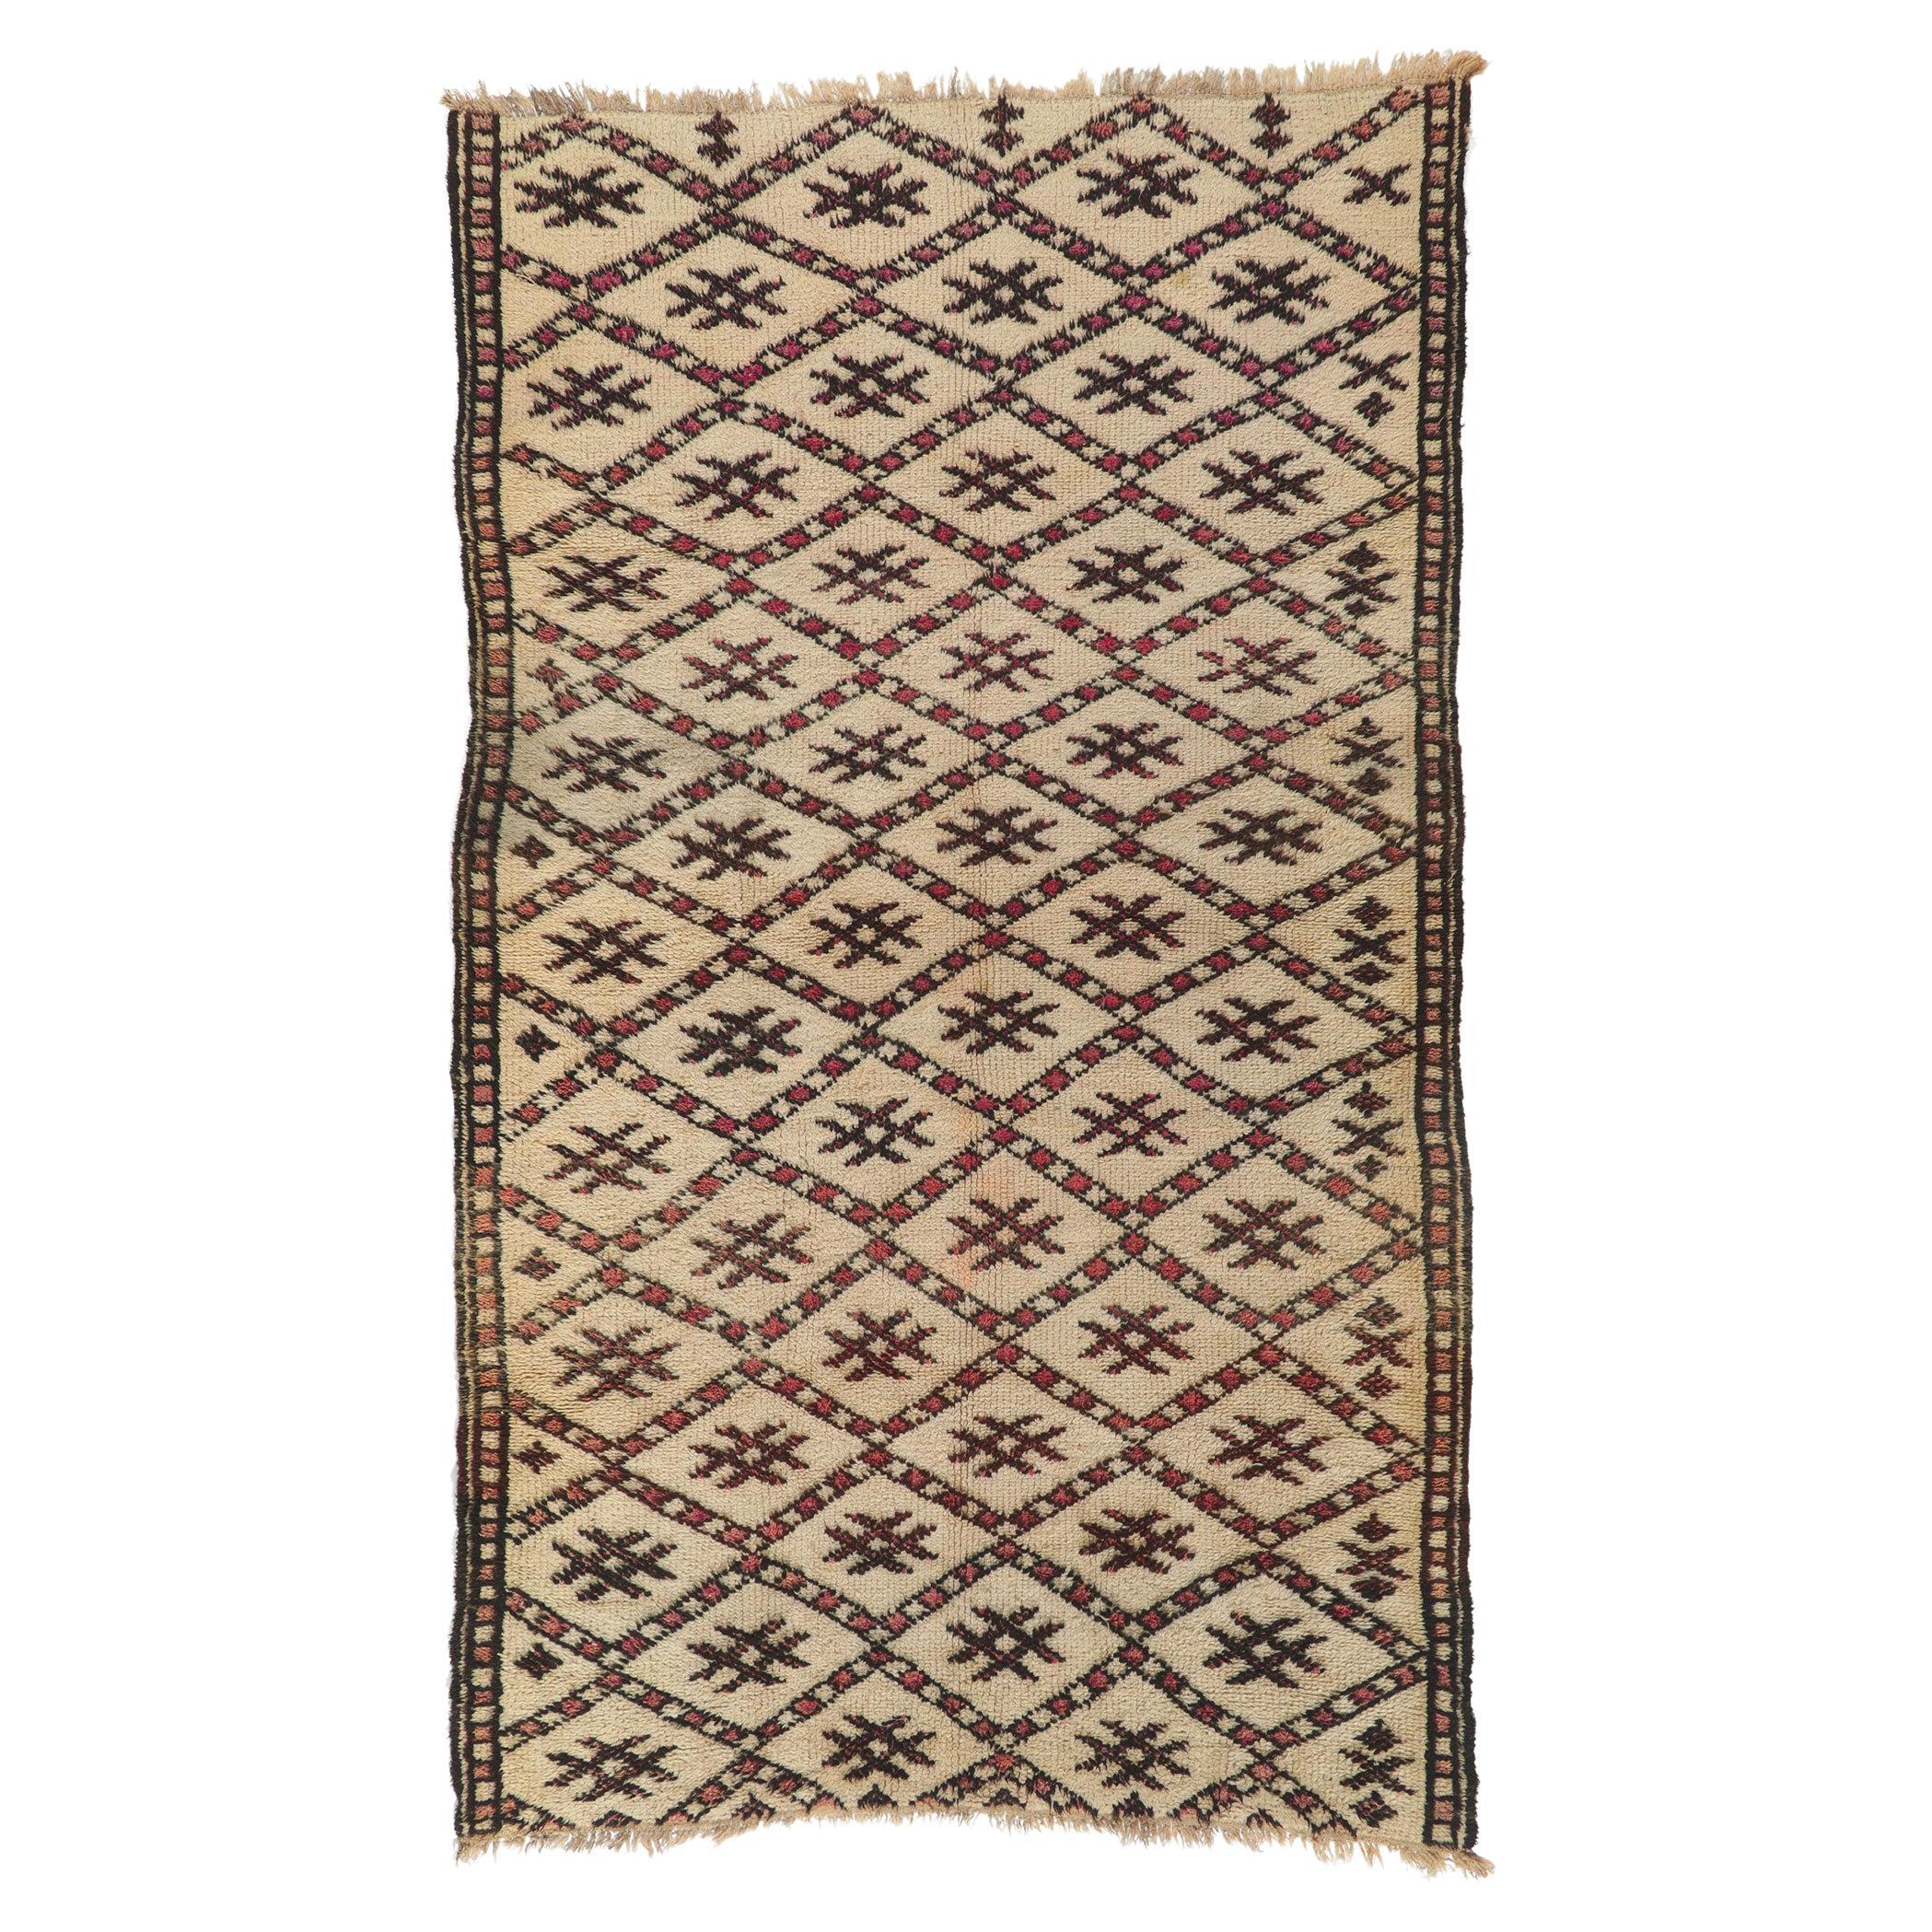 78366 Vintage Moroccan Beni Ourain Rug For Sale